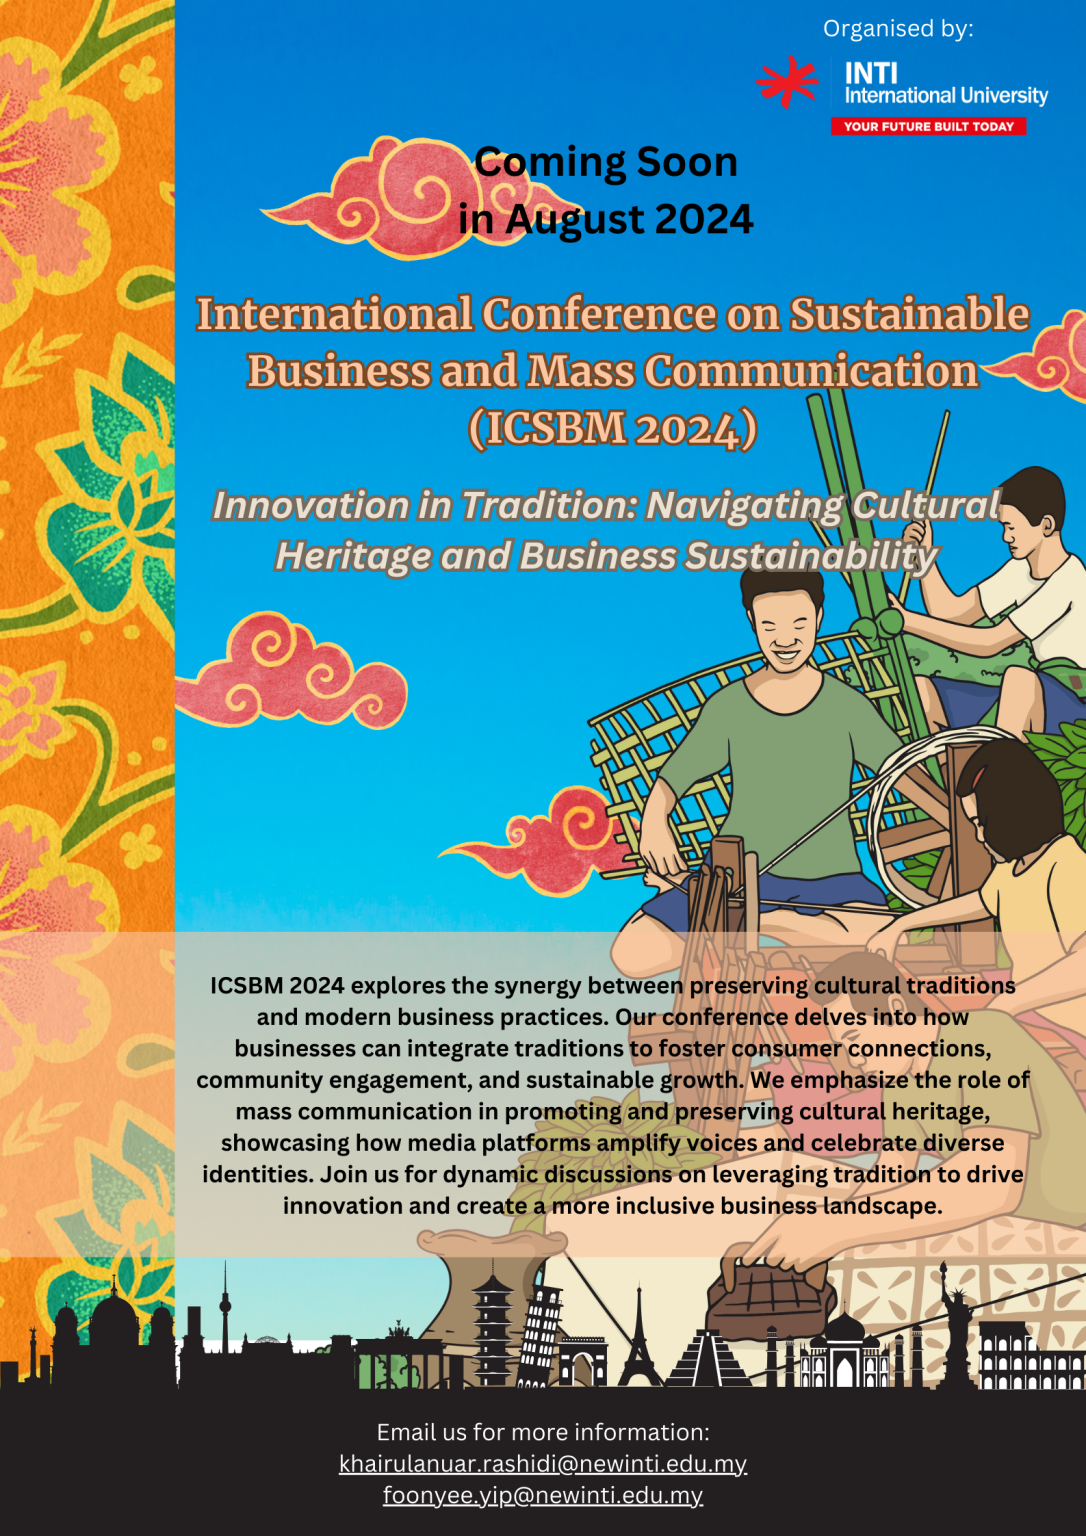 International Conference on Sustainable Business and Mass Communication 2024